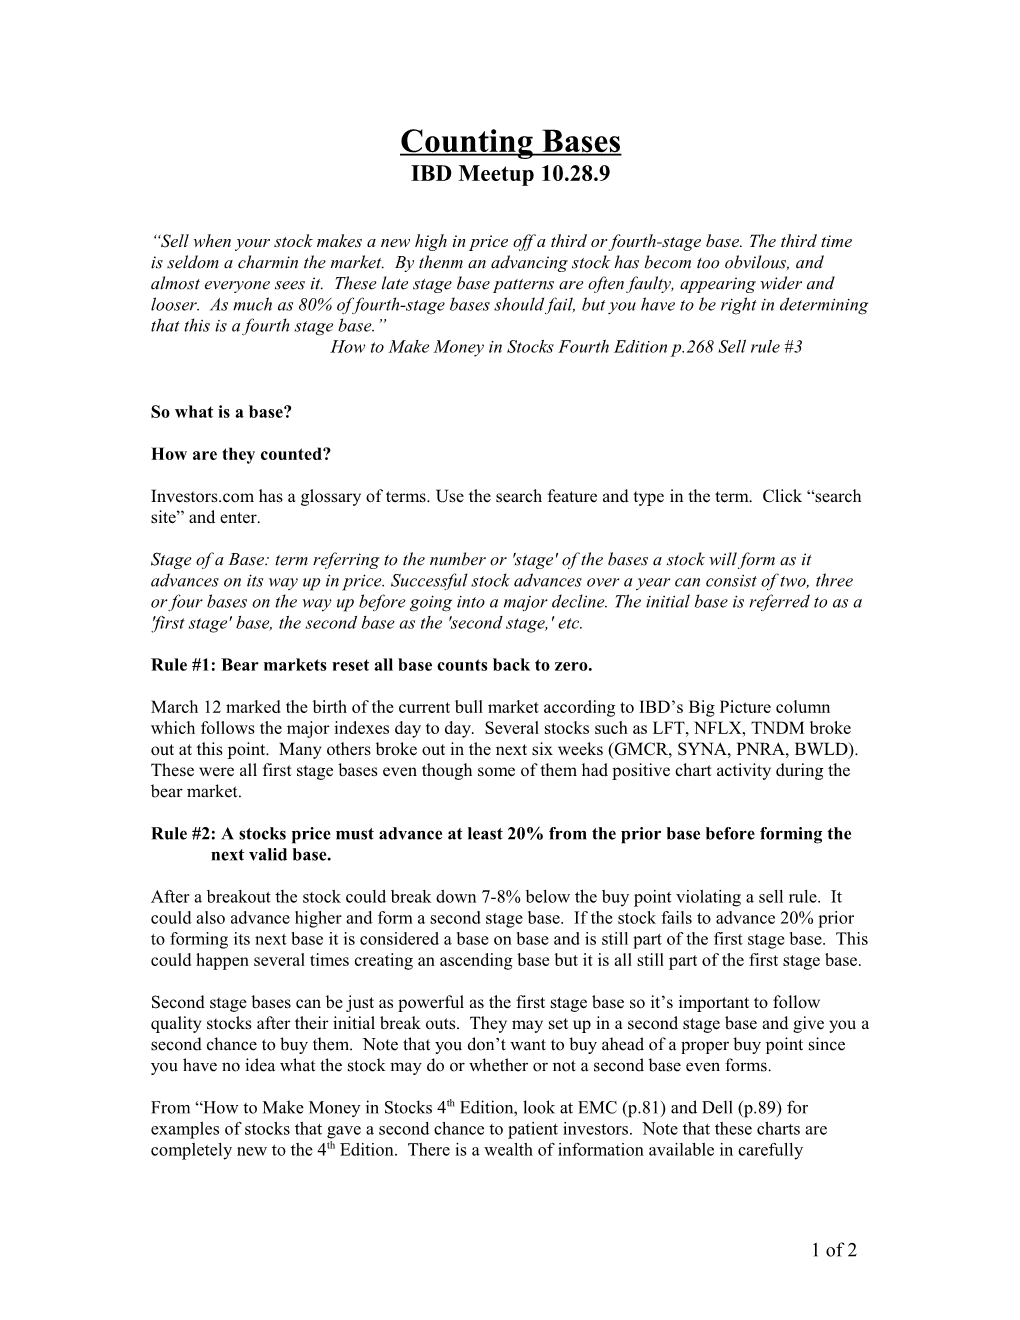 How to Make Money in Stocks Fourth Edition P.268 Sell Rule #3